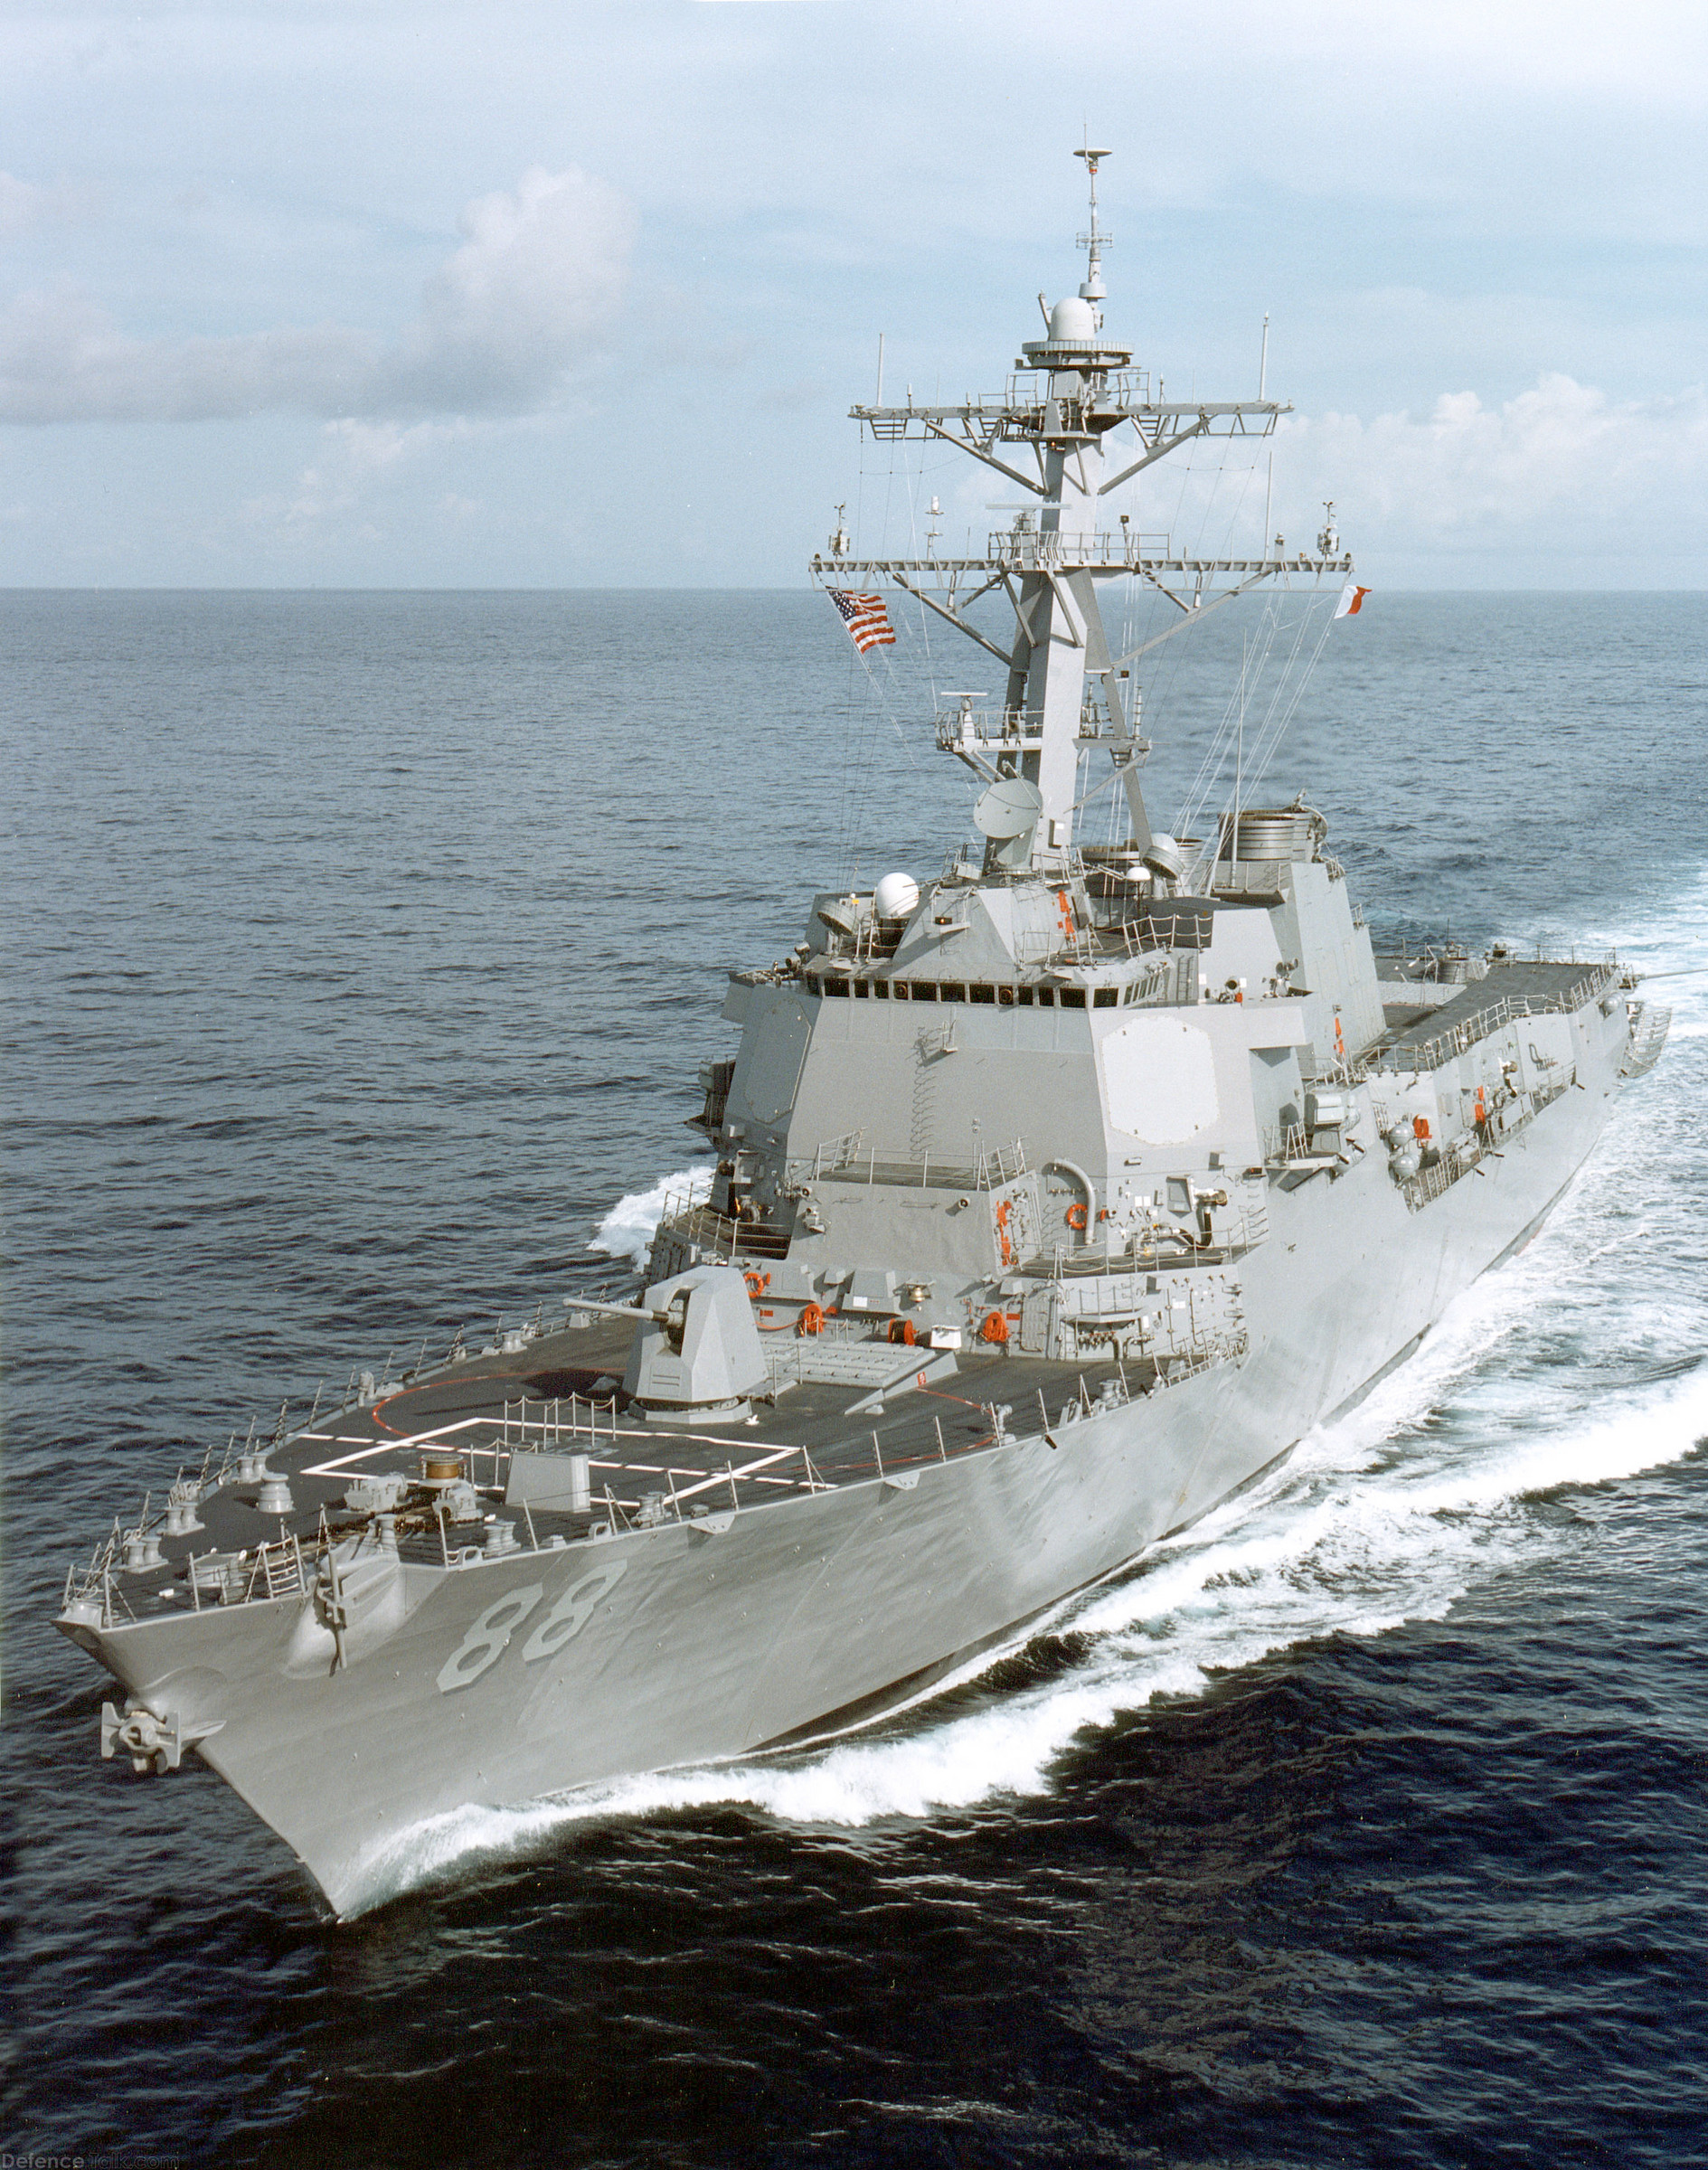 Guided missile destroyer Preble during sea trials